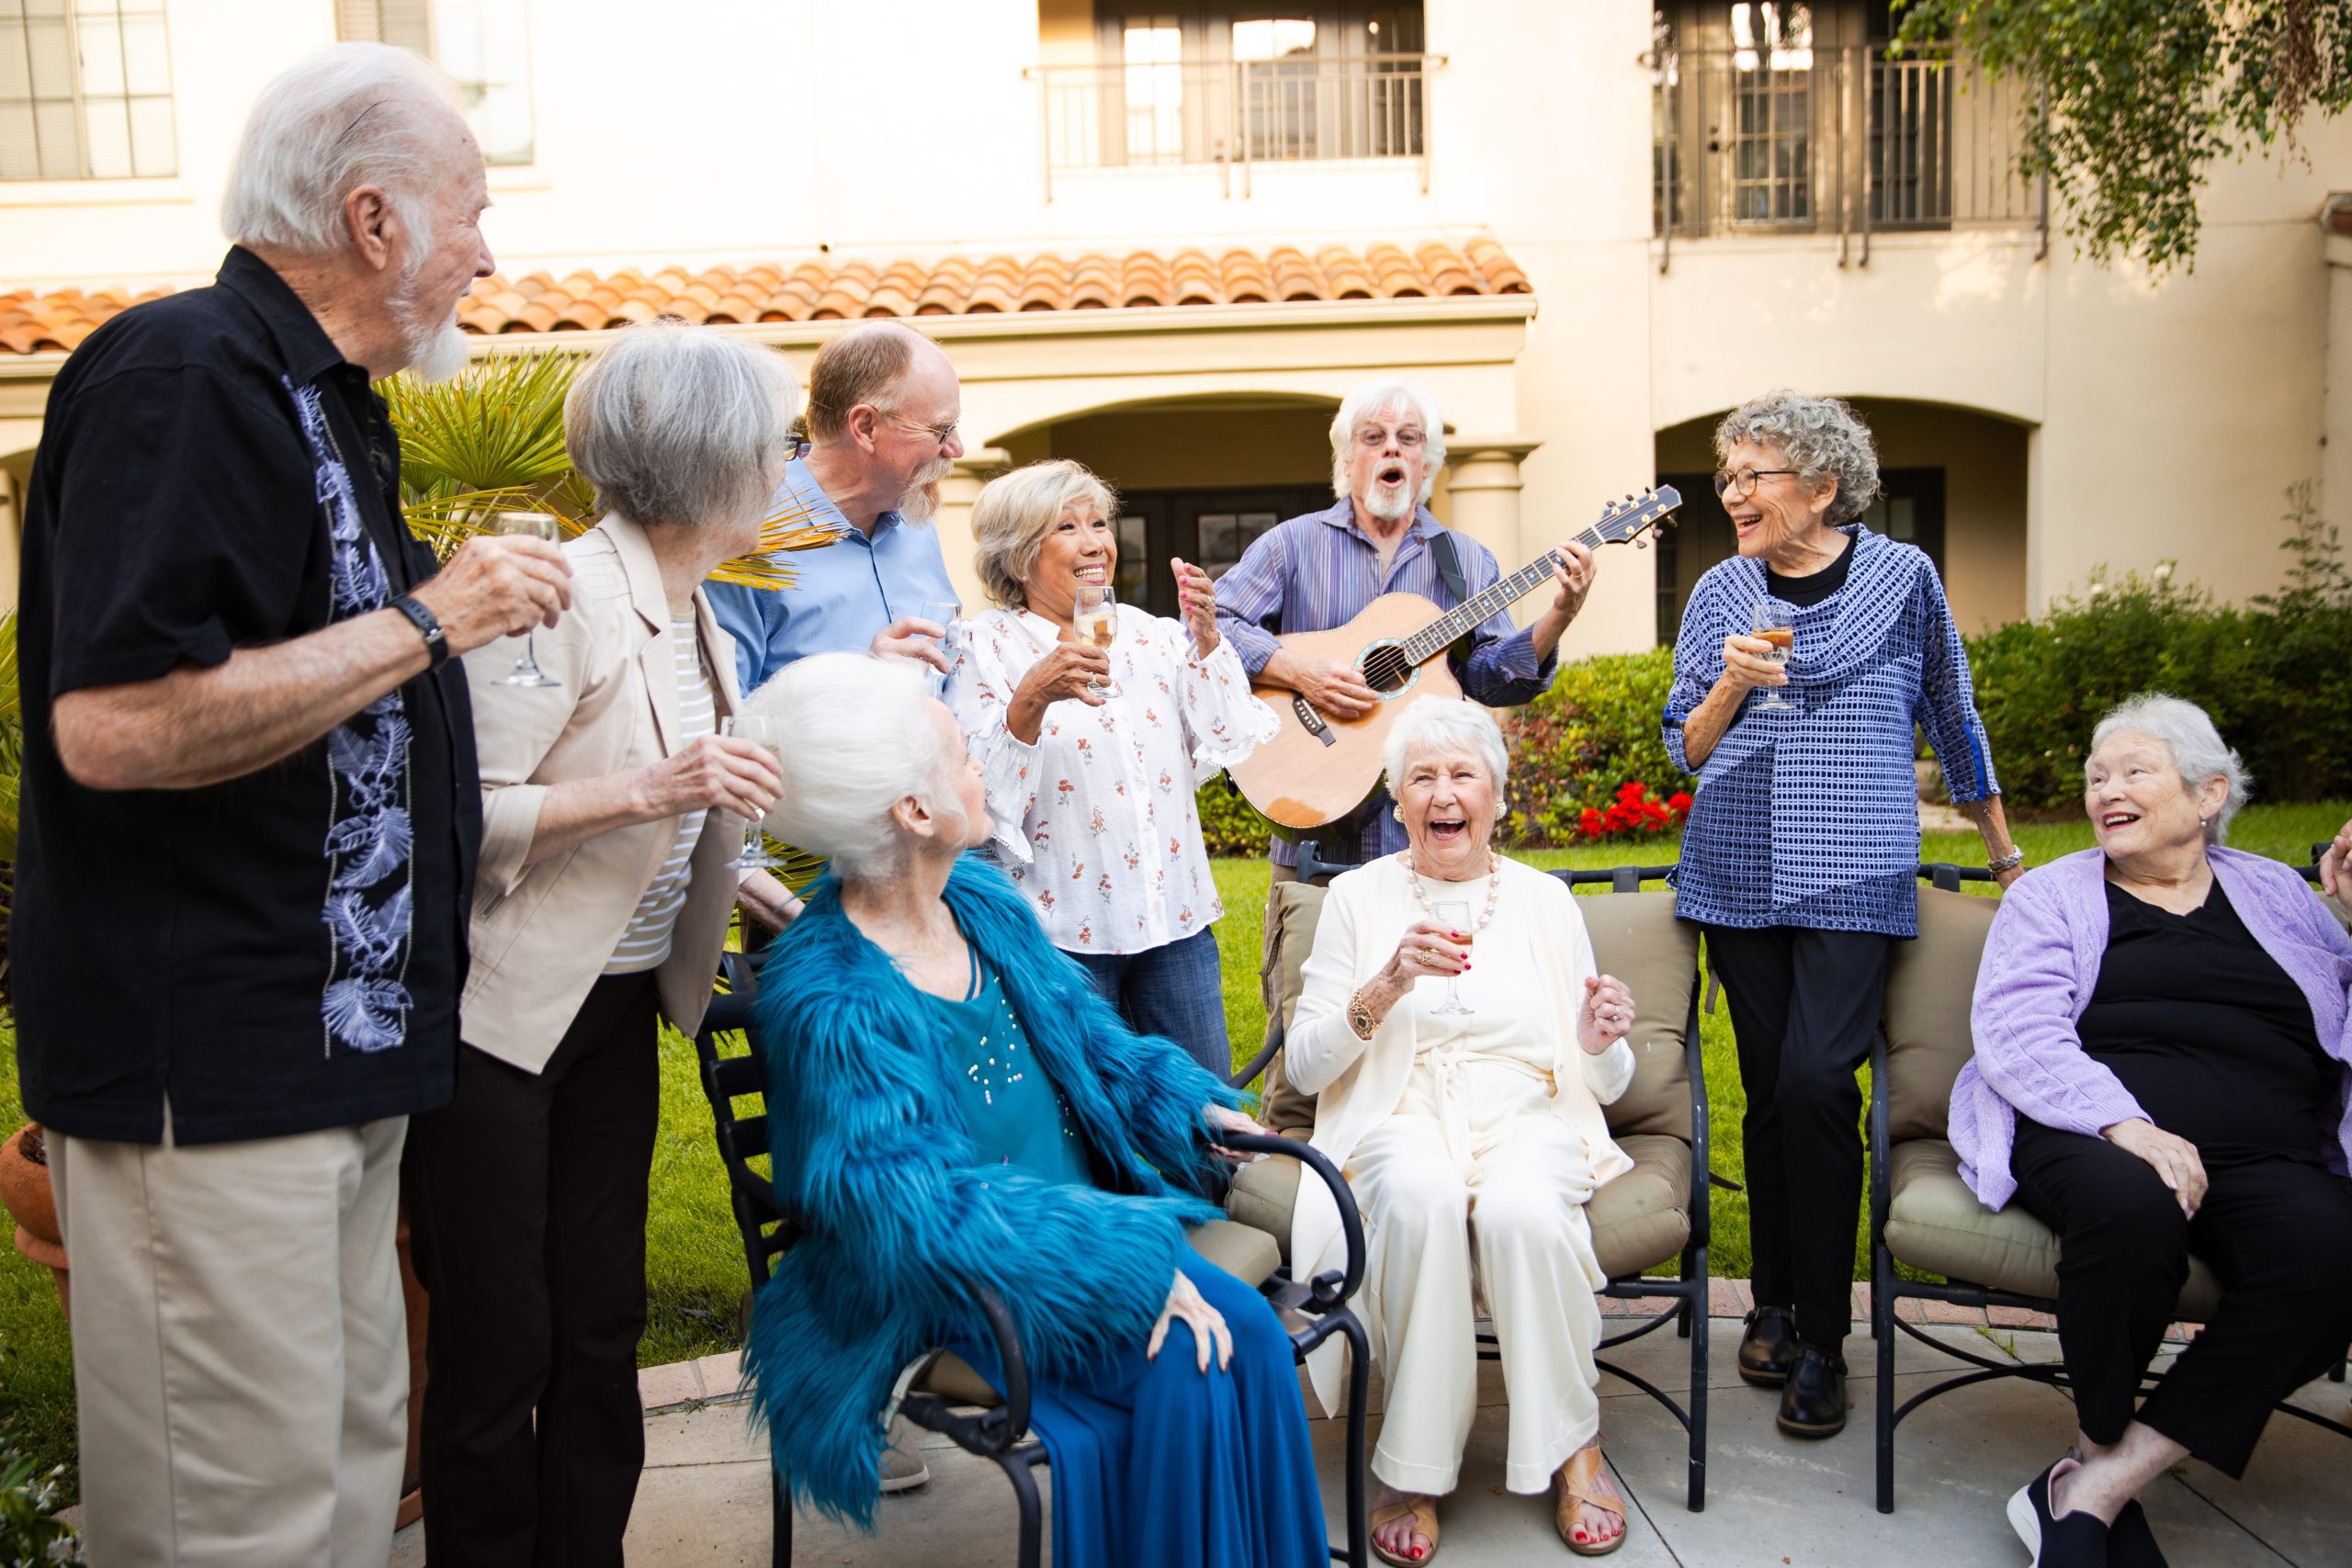 A diverse group of elderly individuals joyfully playing musical instruments together in harmony.